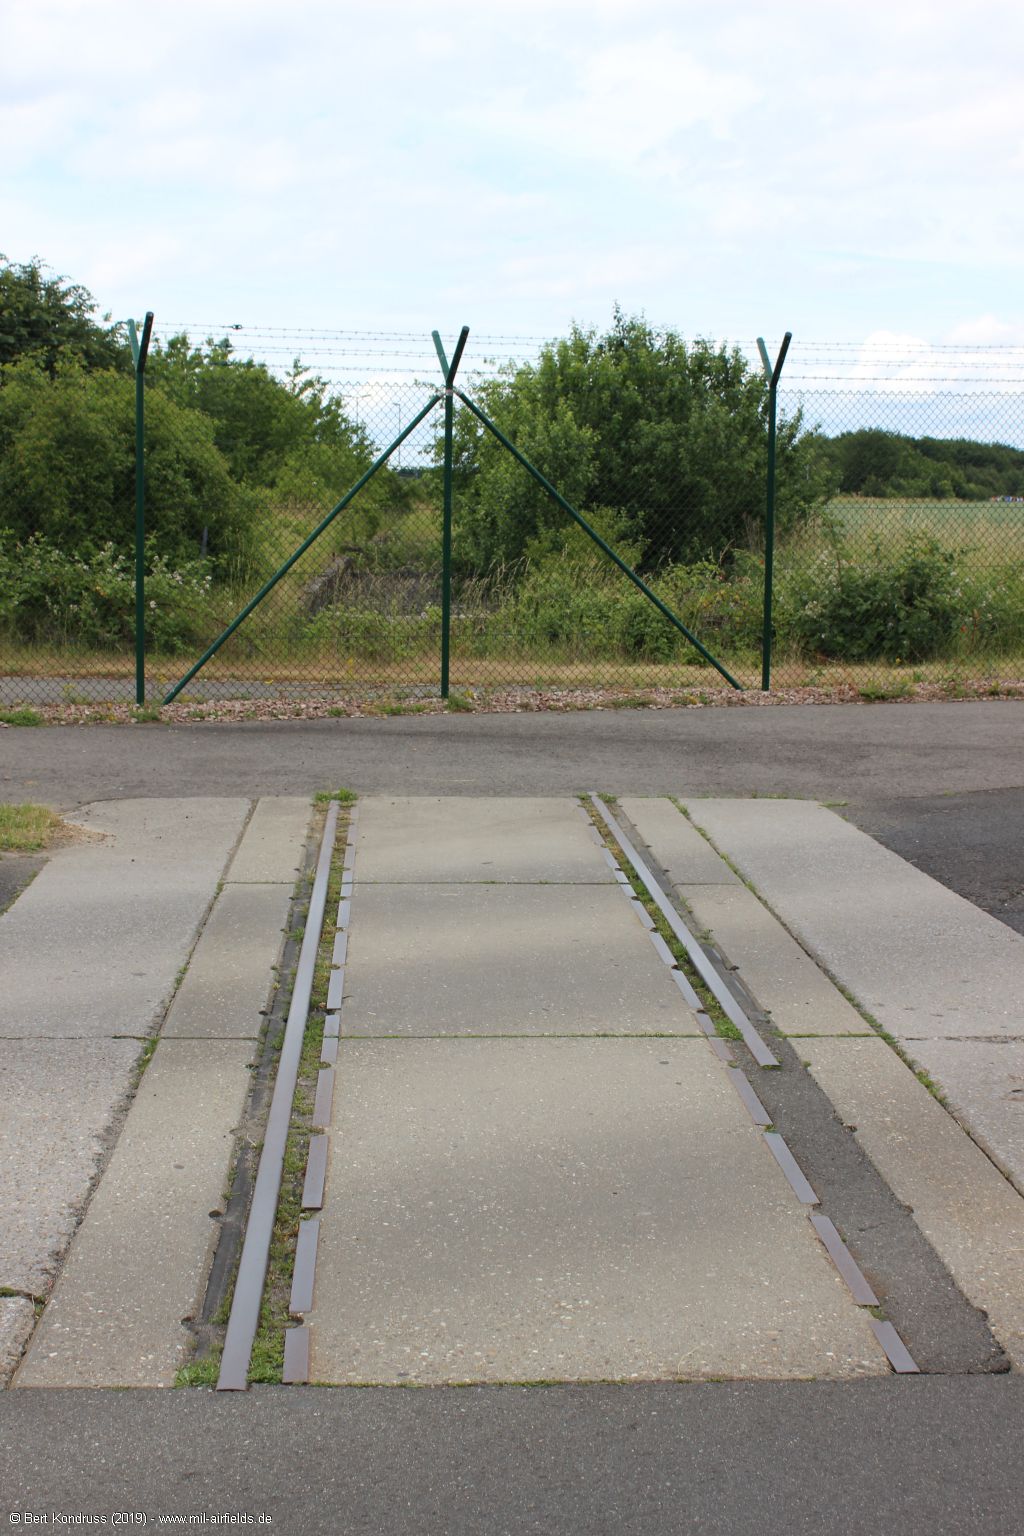 Track remains at Erbenheim Airfield, Germany